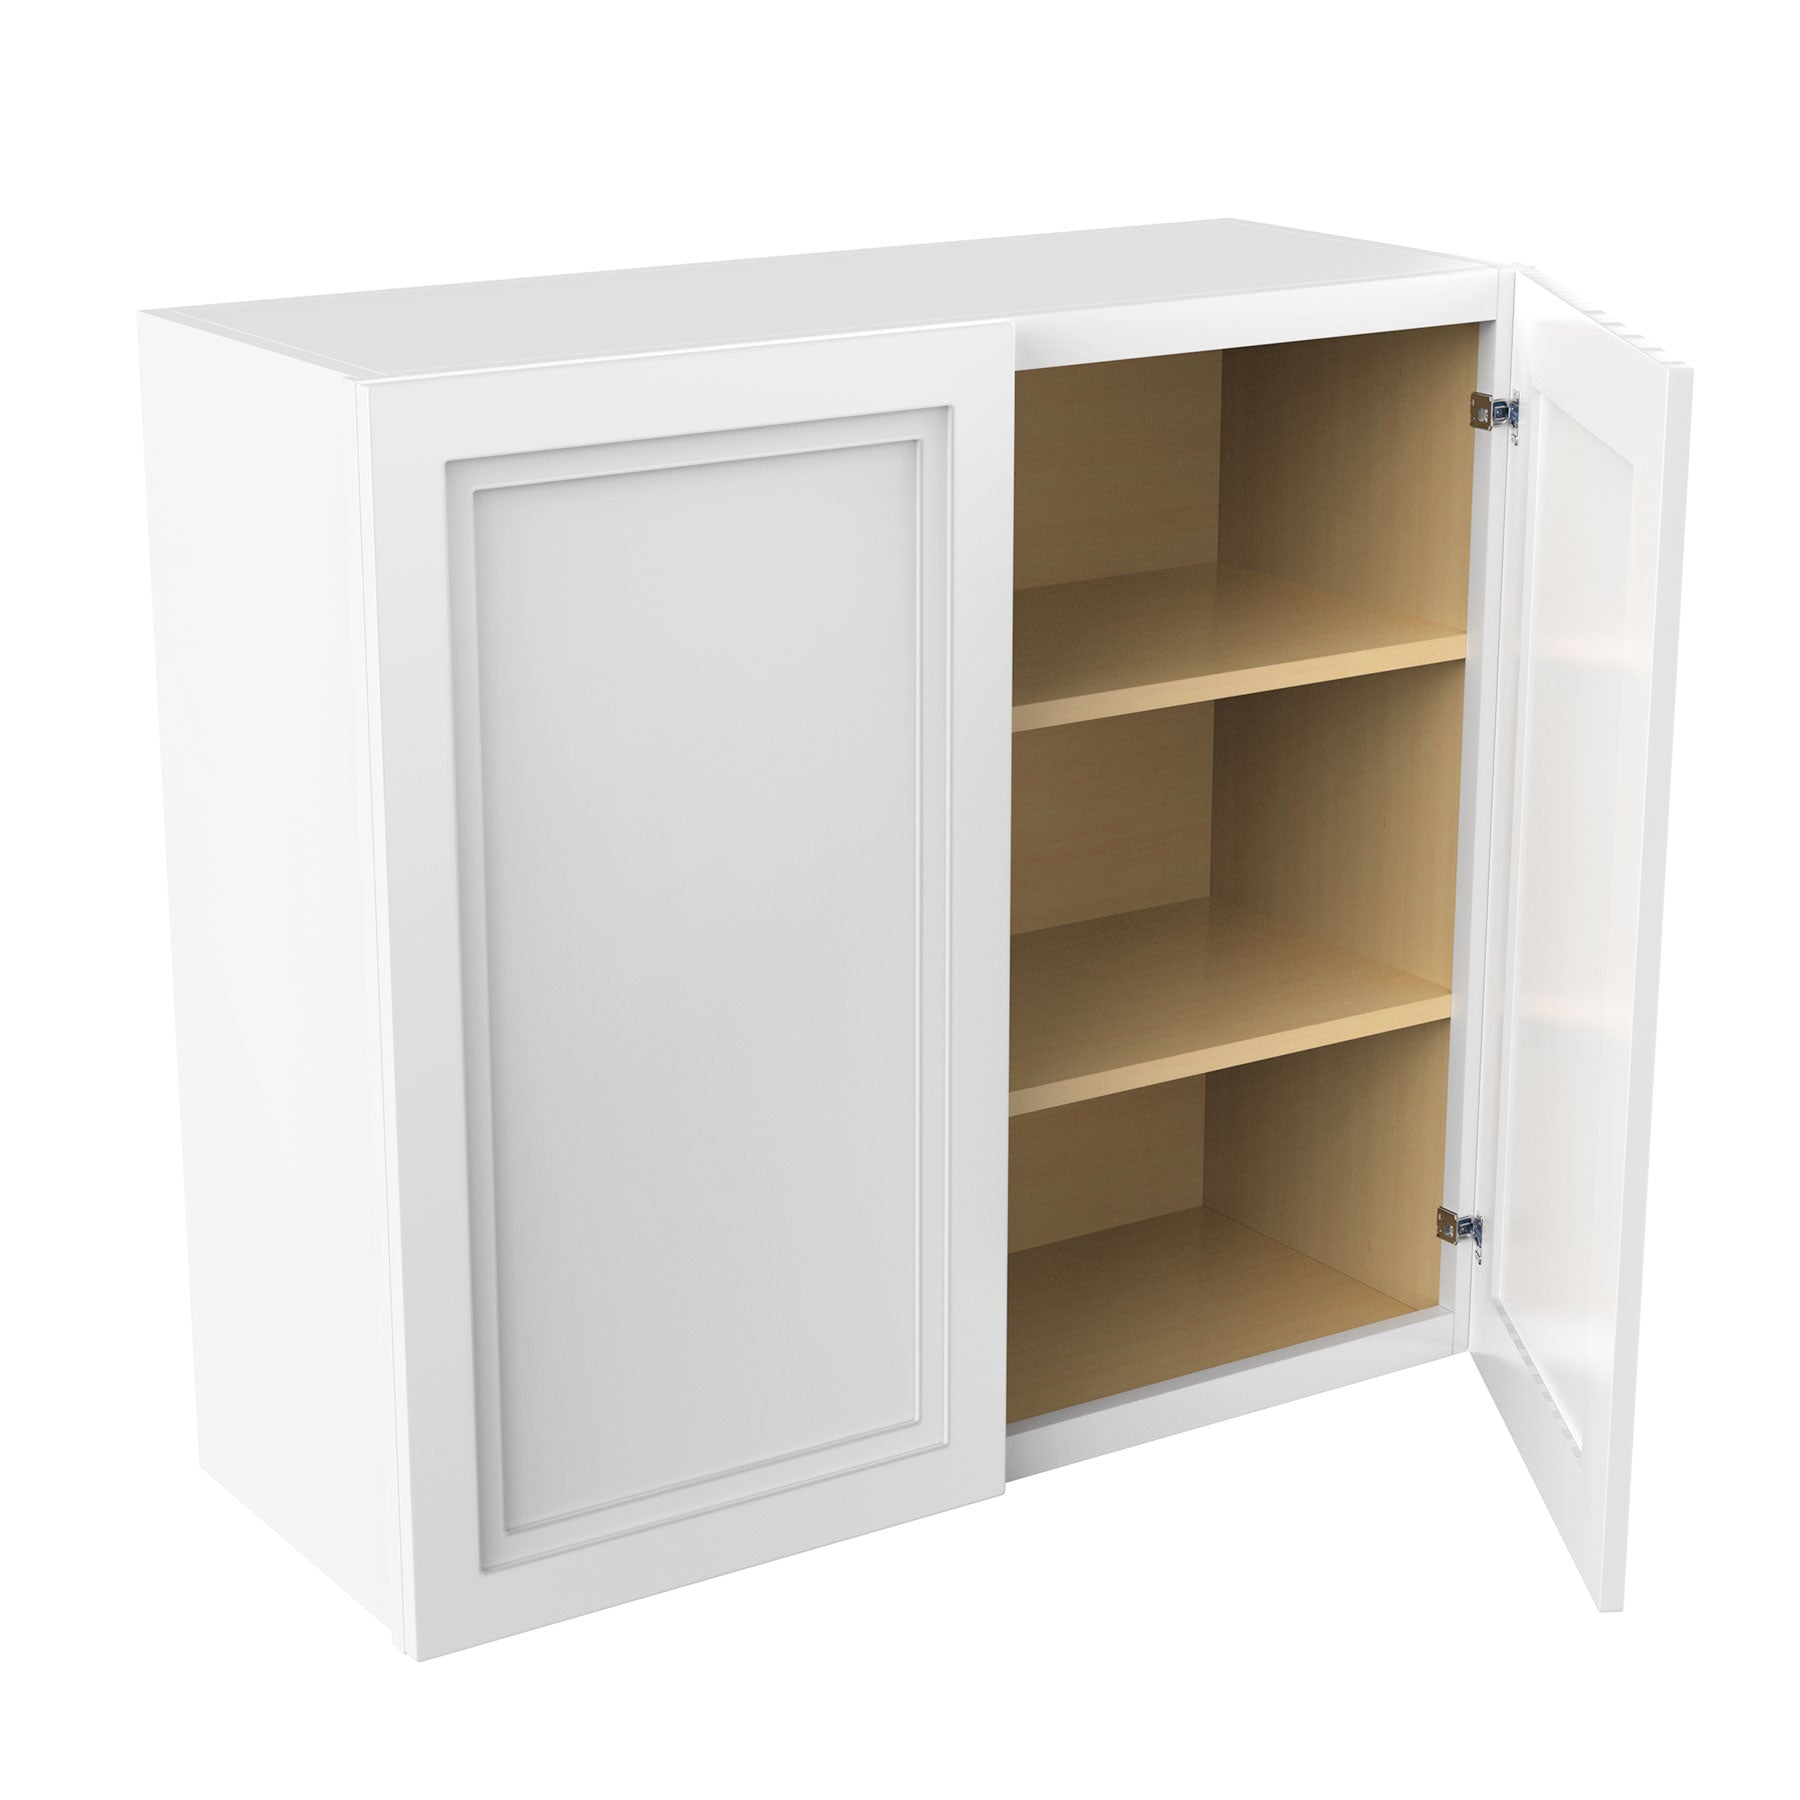 Fashion White - Double Door Wall Cabinet | 33"W x 30"H x 12"D